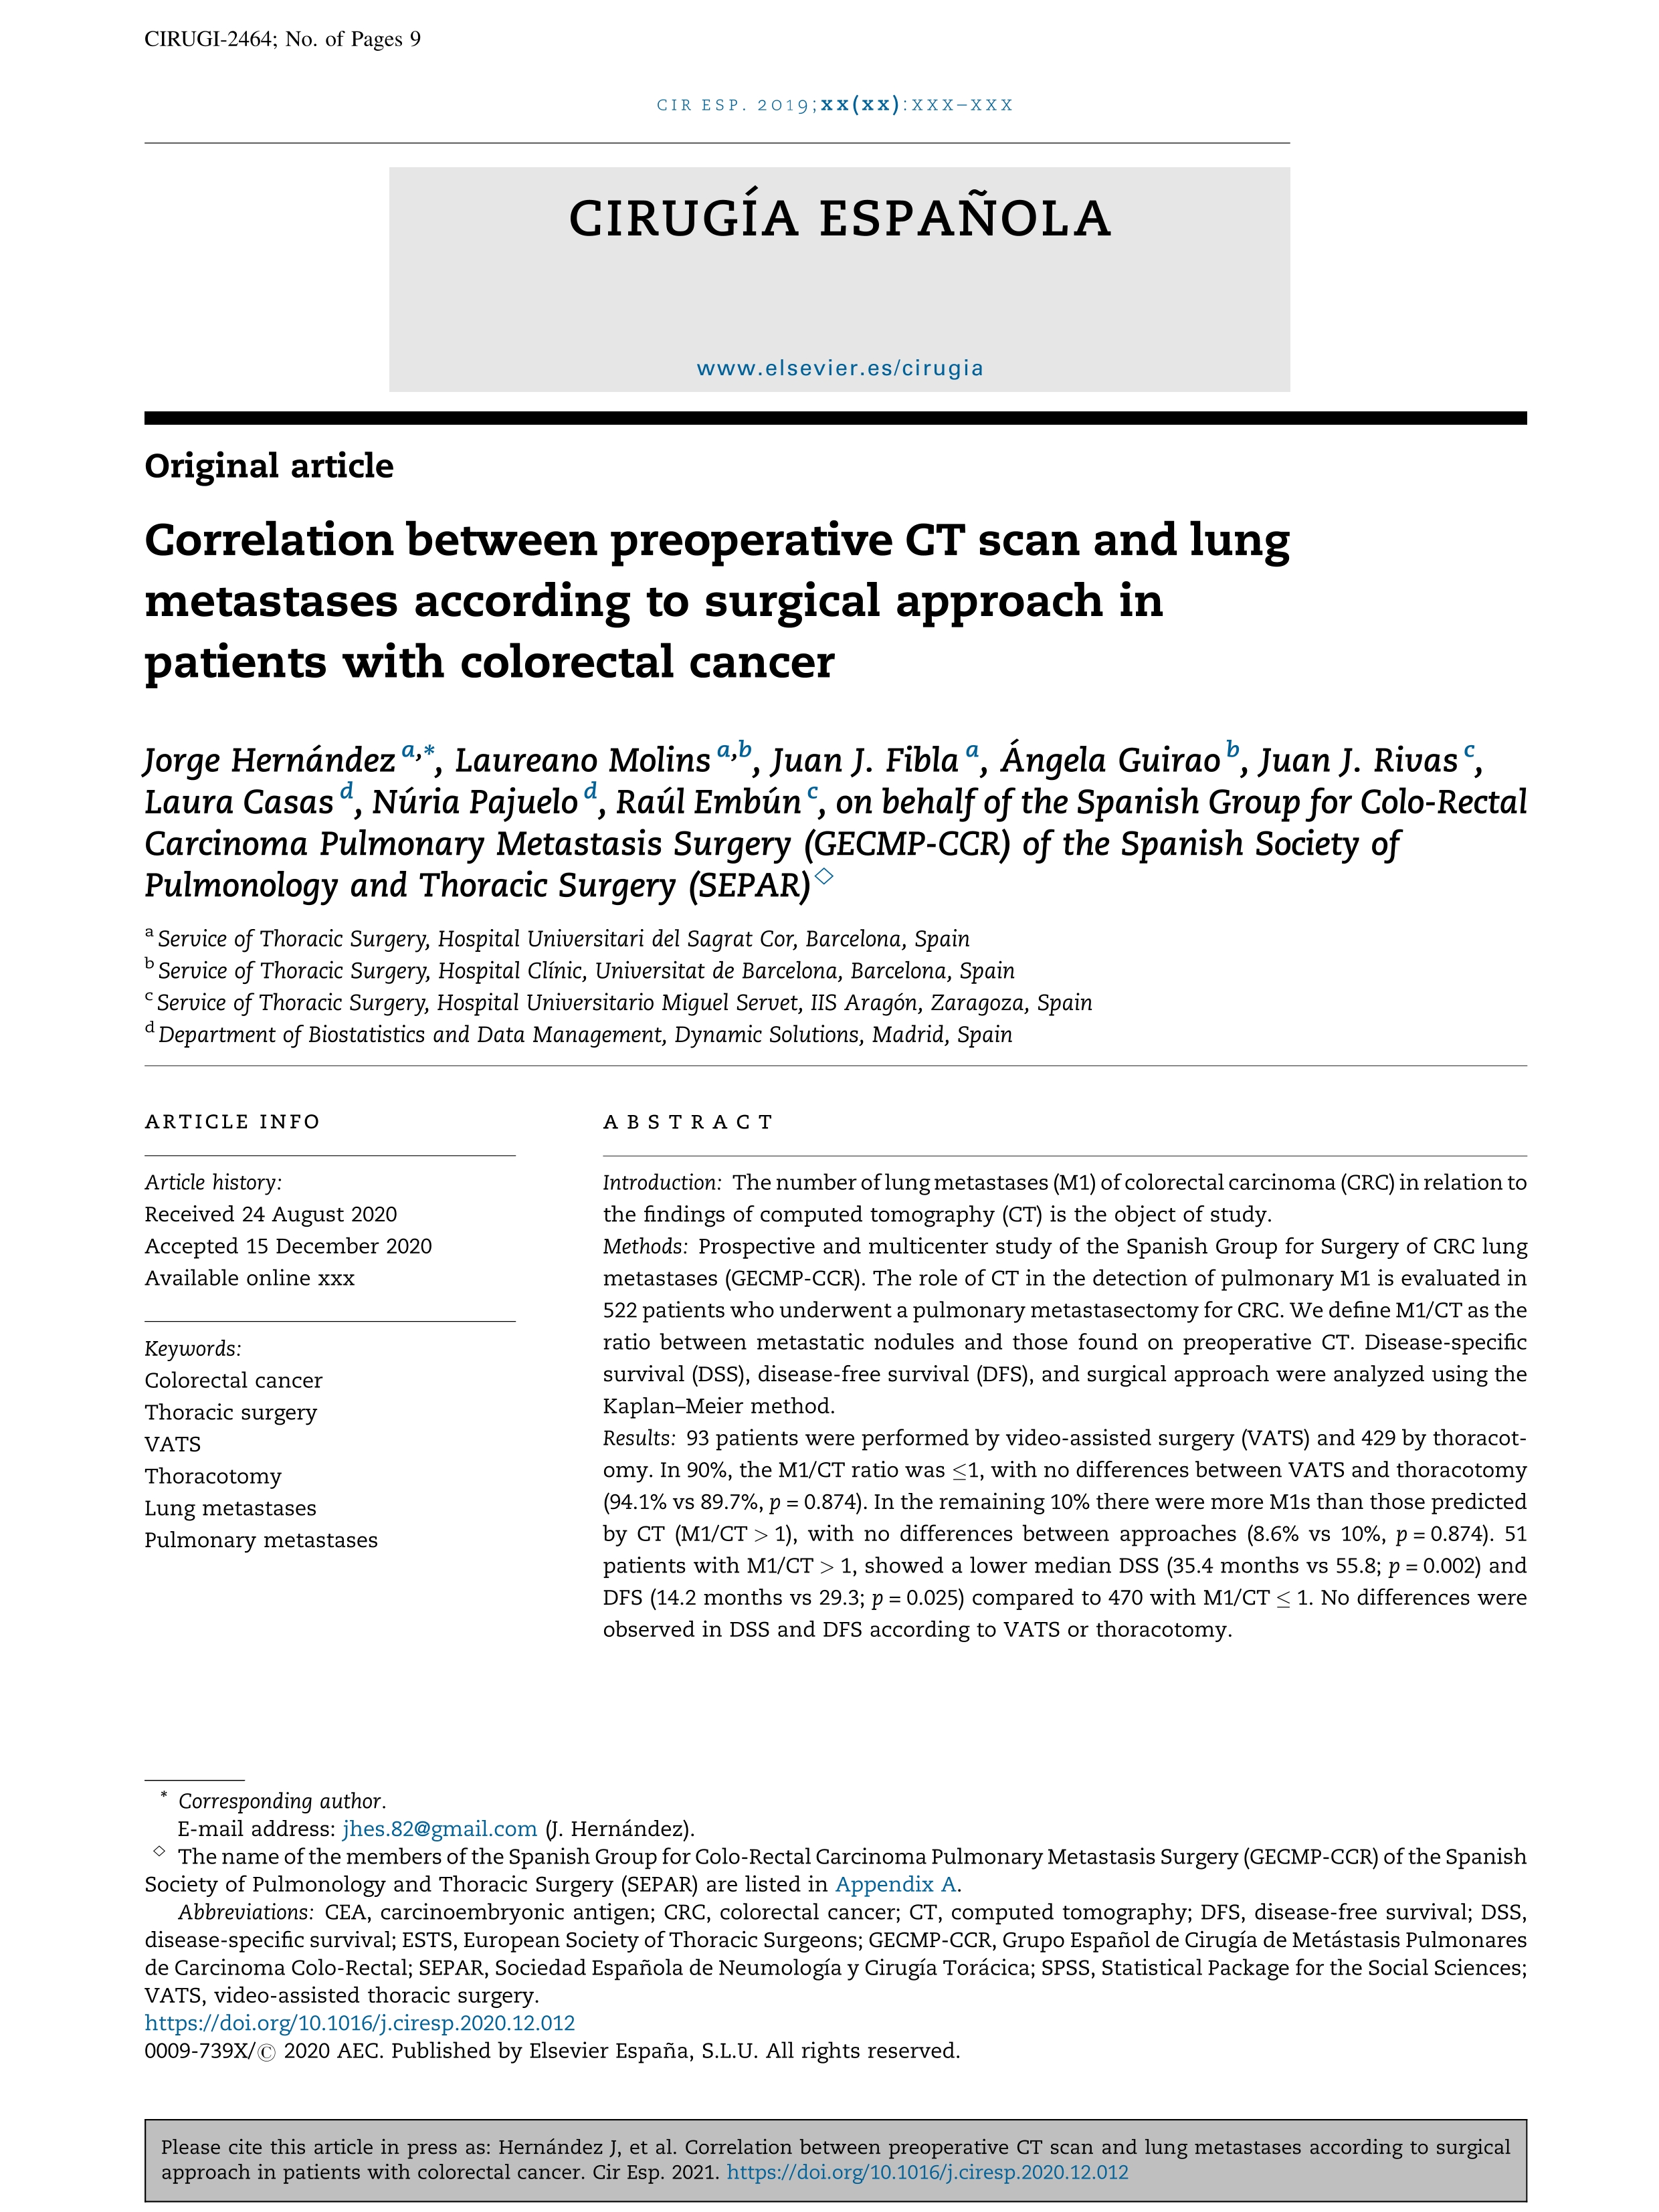 Correlation between preoperative CT scan and lung metastases according to surgical approach in patients with colorectal cancer